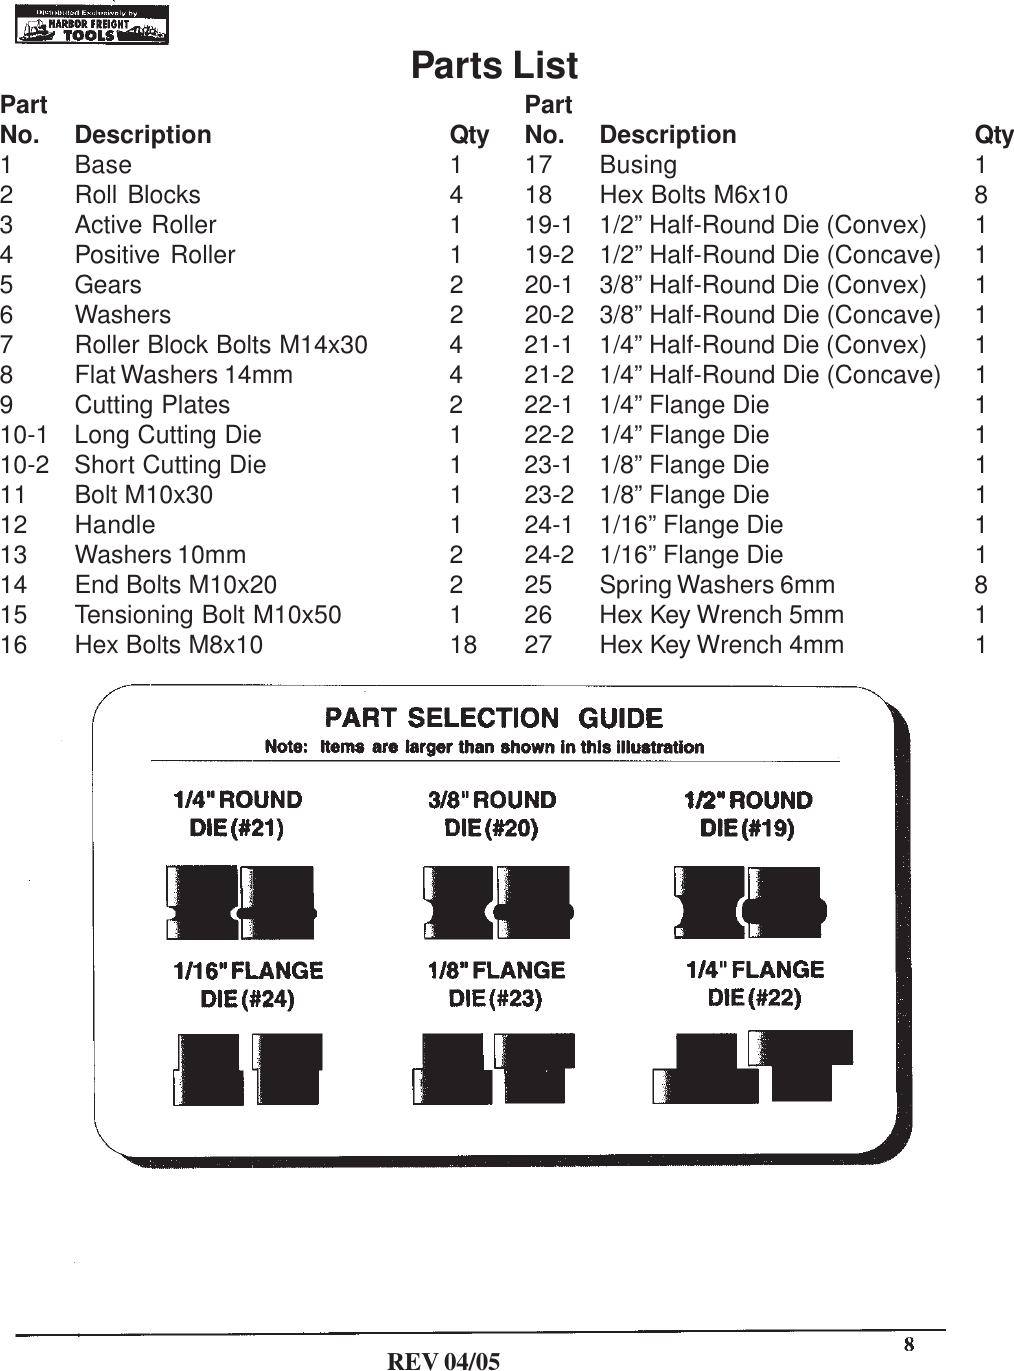 Page 8 of 10 - Harbor-Freight Harbor-Freight-34104-Users-Manual- 34104 Manual  Harbor-freight-34104-users-manual